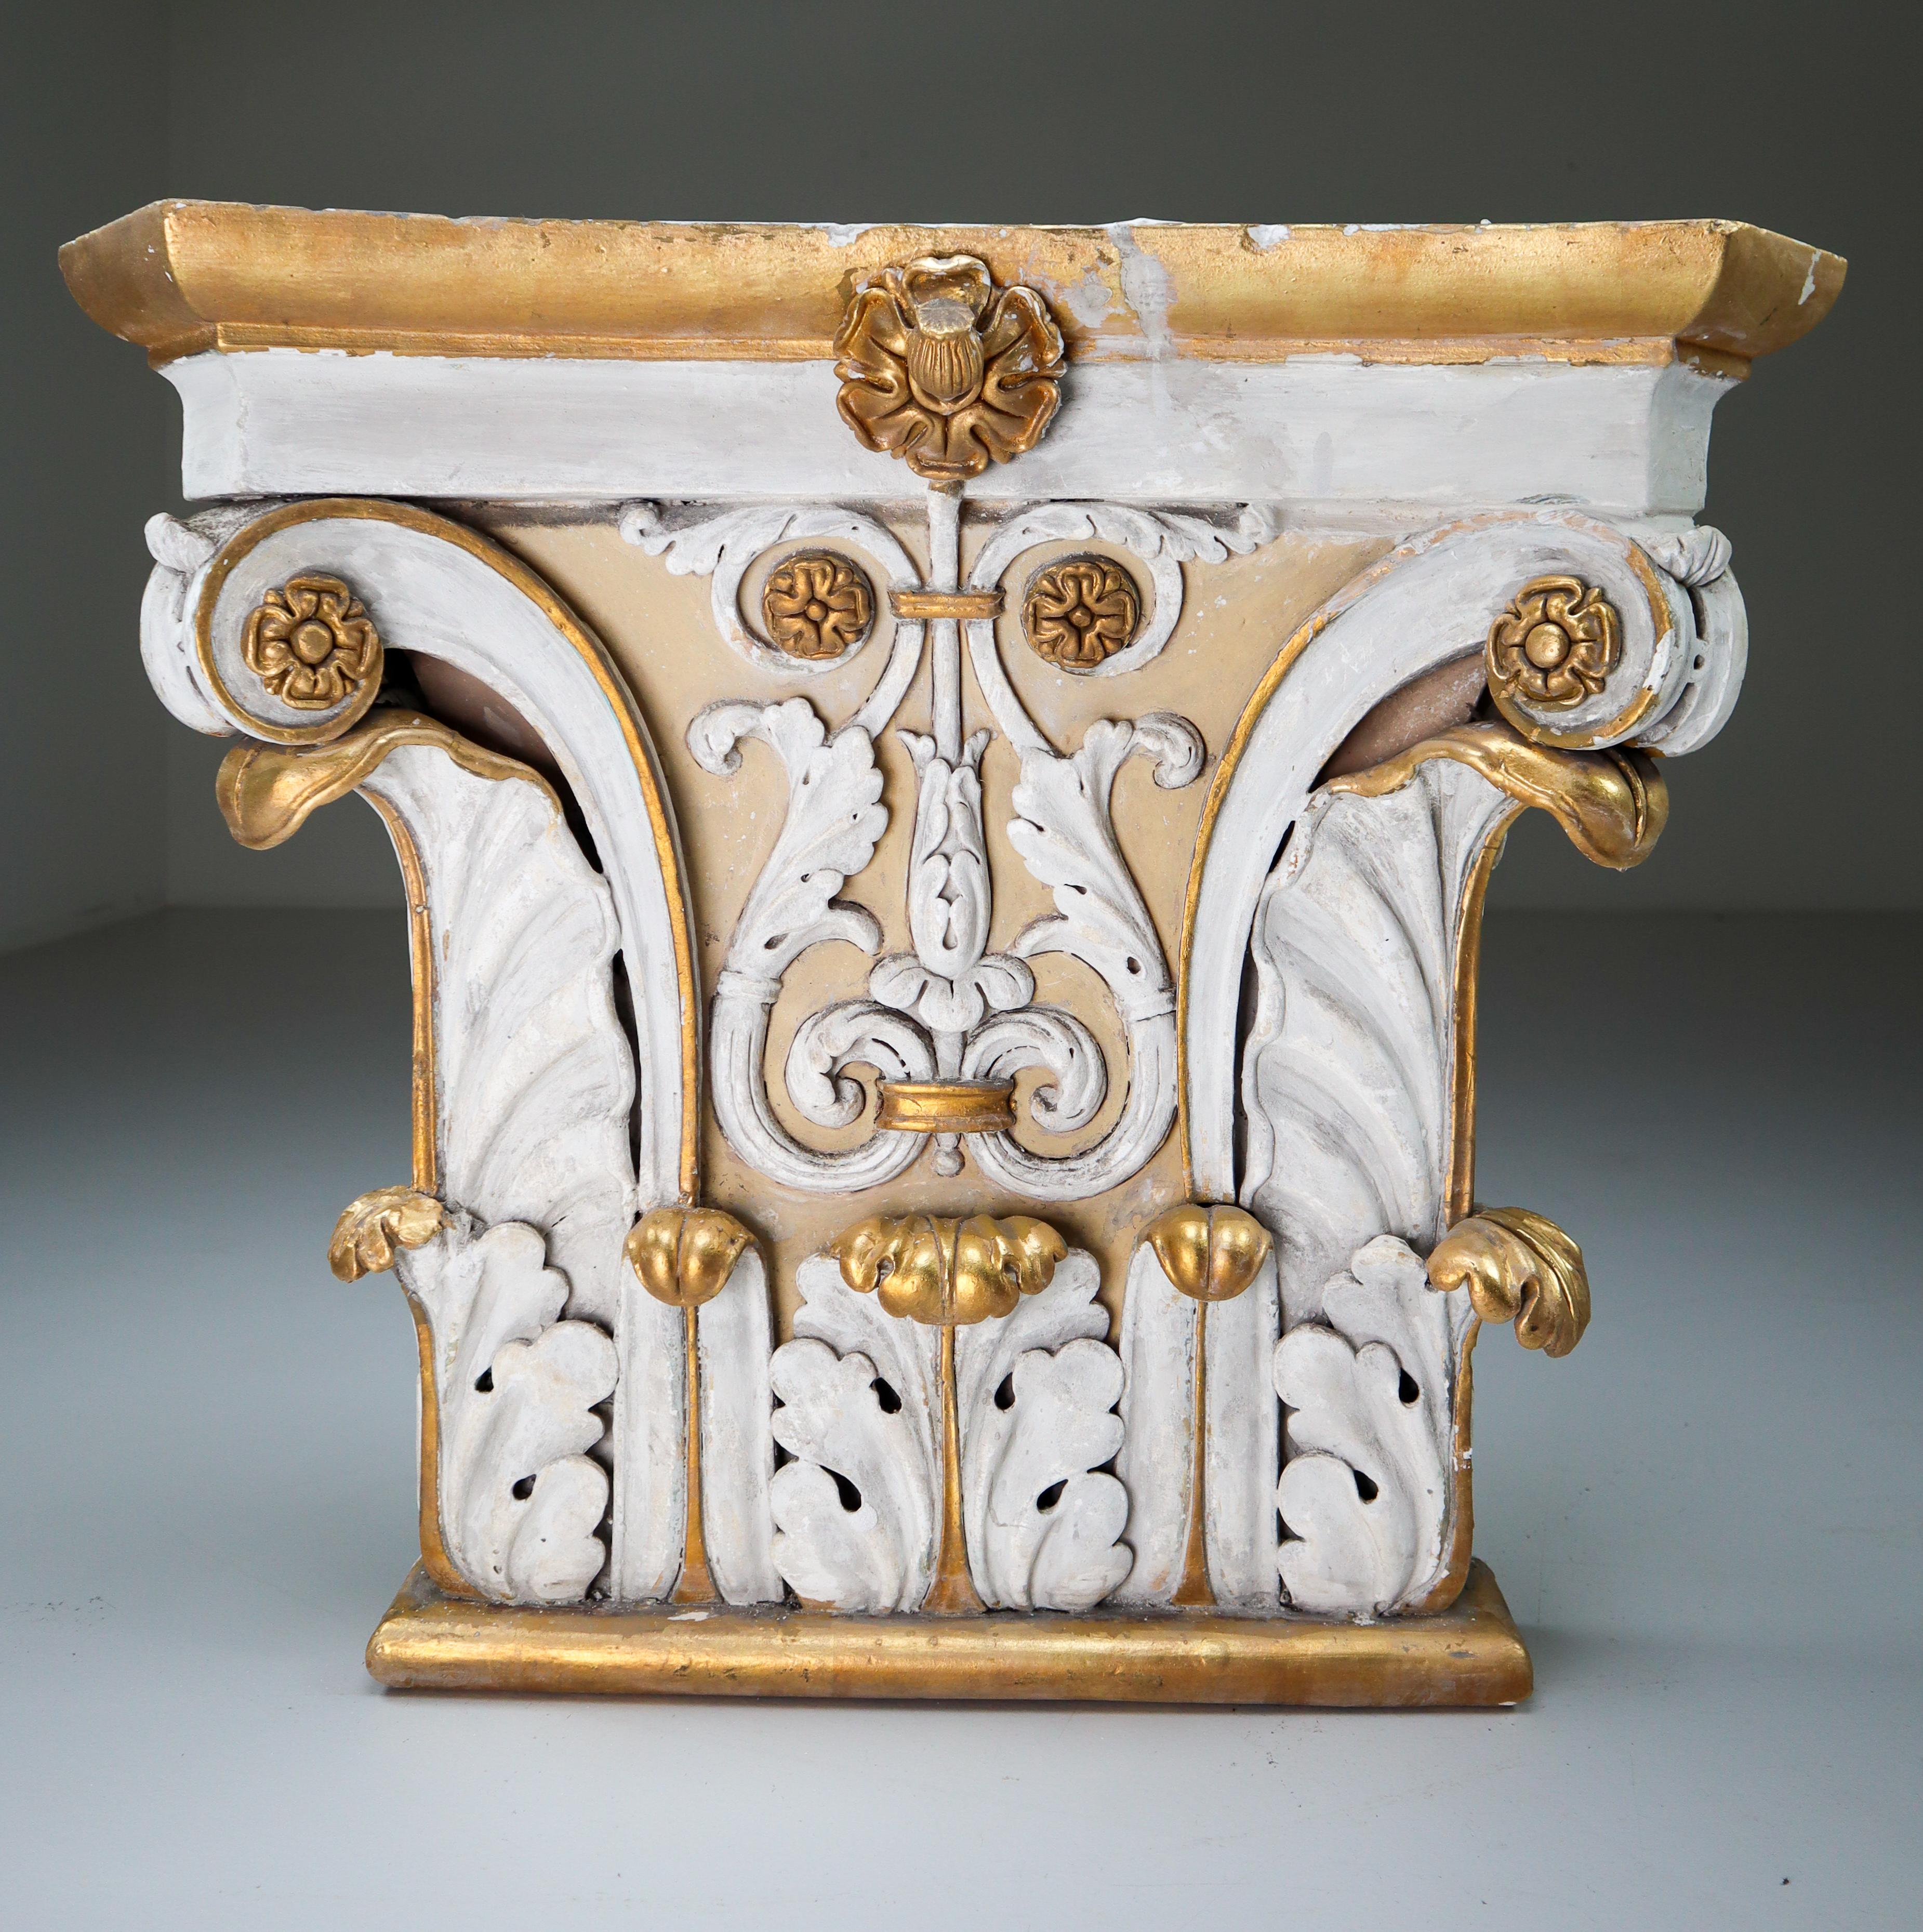 Decorative large cast plaster capital of Iconic order, Austria, 1870-1880. The capital is formed by two volutes on the flanks connected with decorative moulding polychrome gold painted. Originally, these were placed in Austrias public